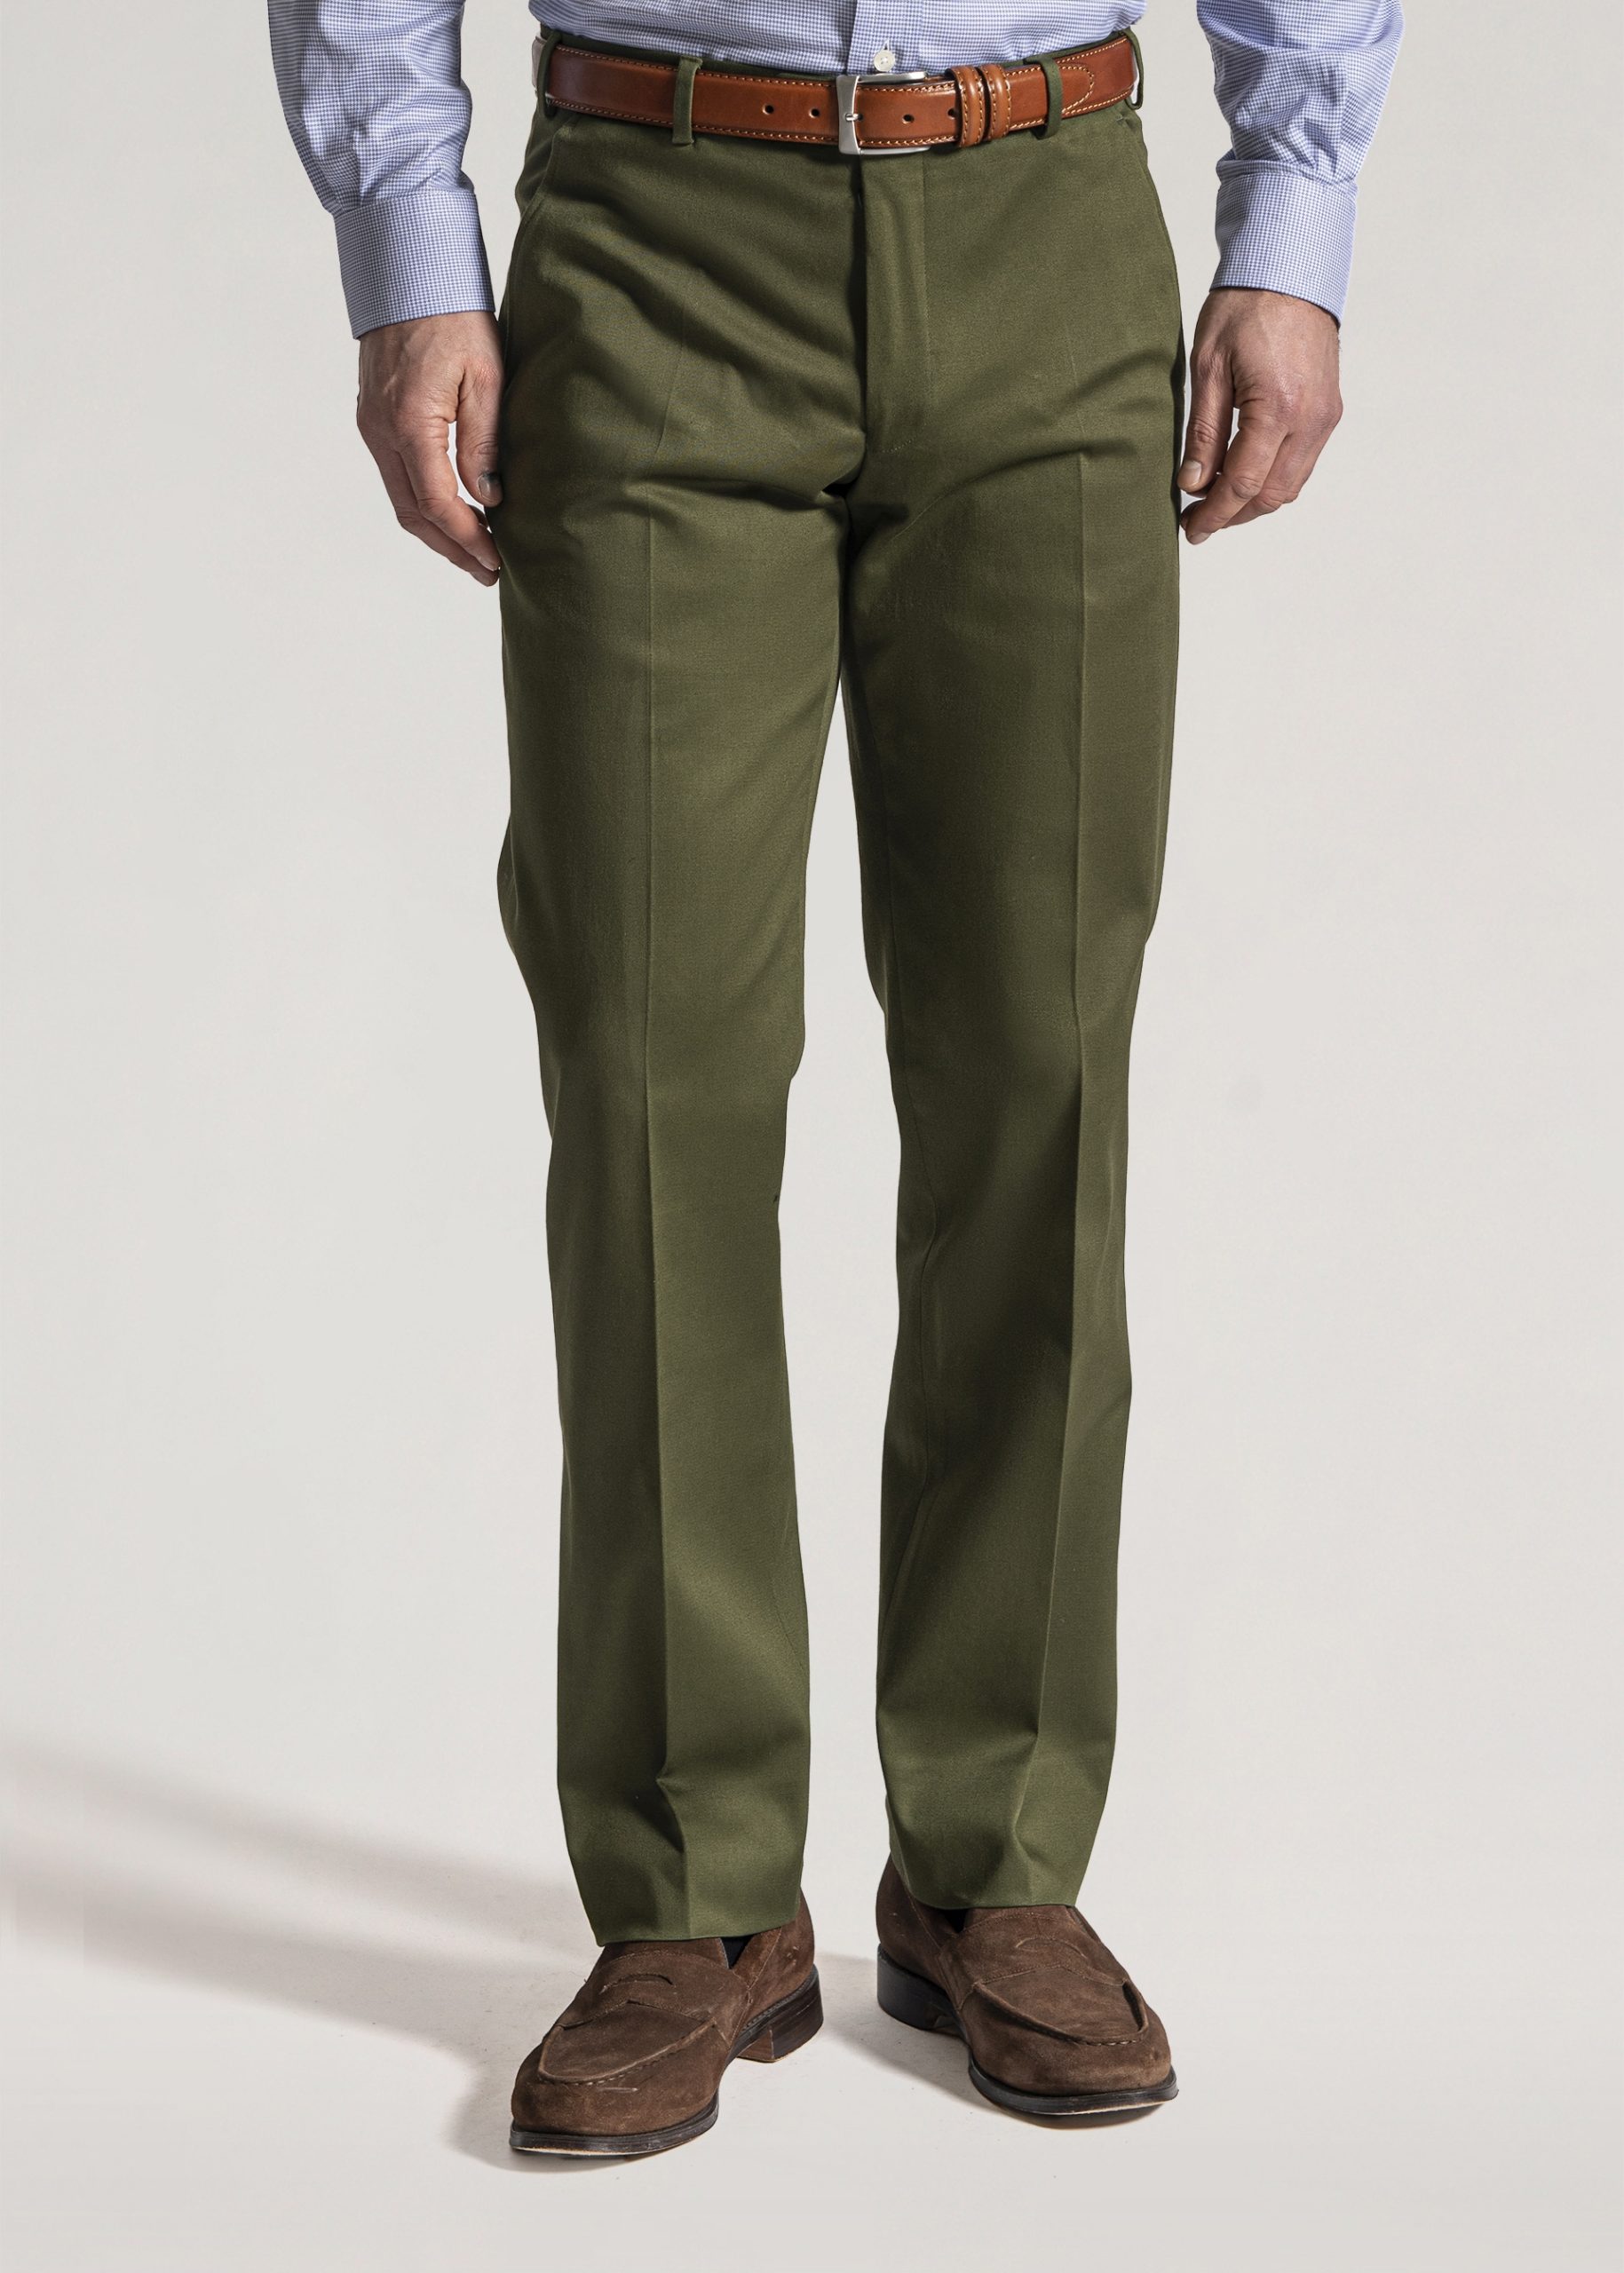 Army green cotton twill trousers styled with brown leather belt